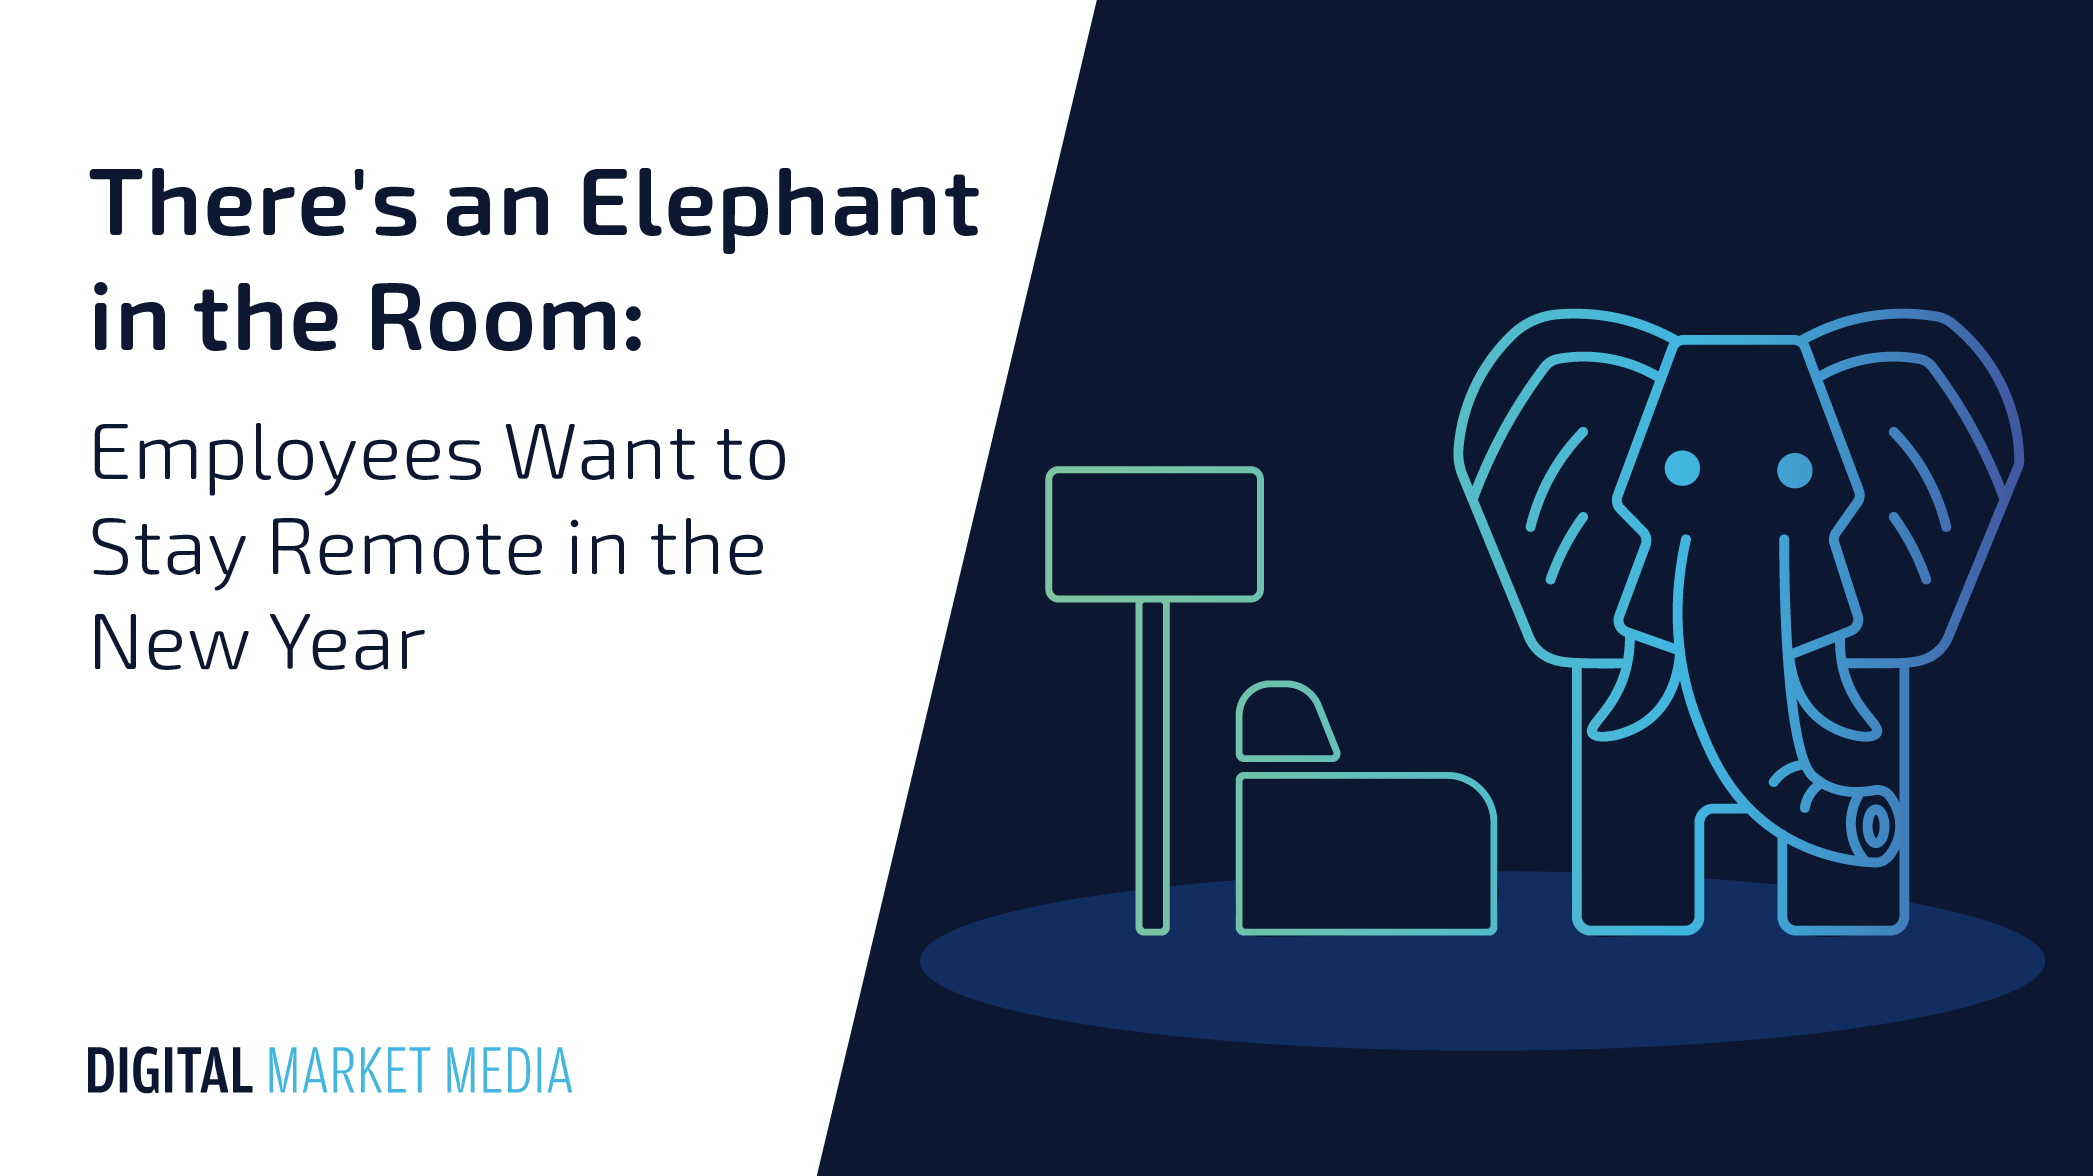 There's an Elephant in the Room: Employees Want to Stay Remote in the New Year